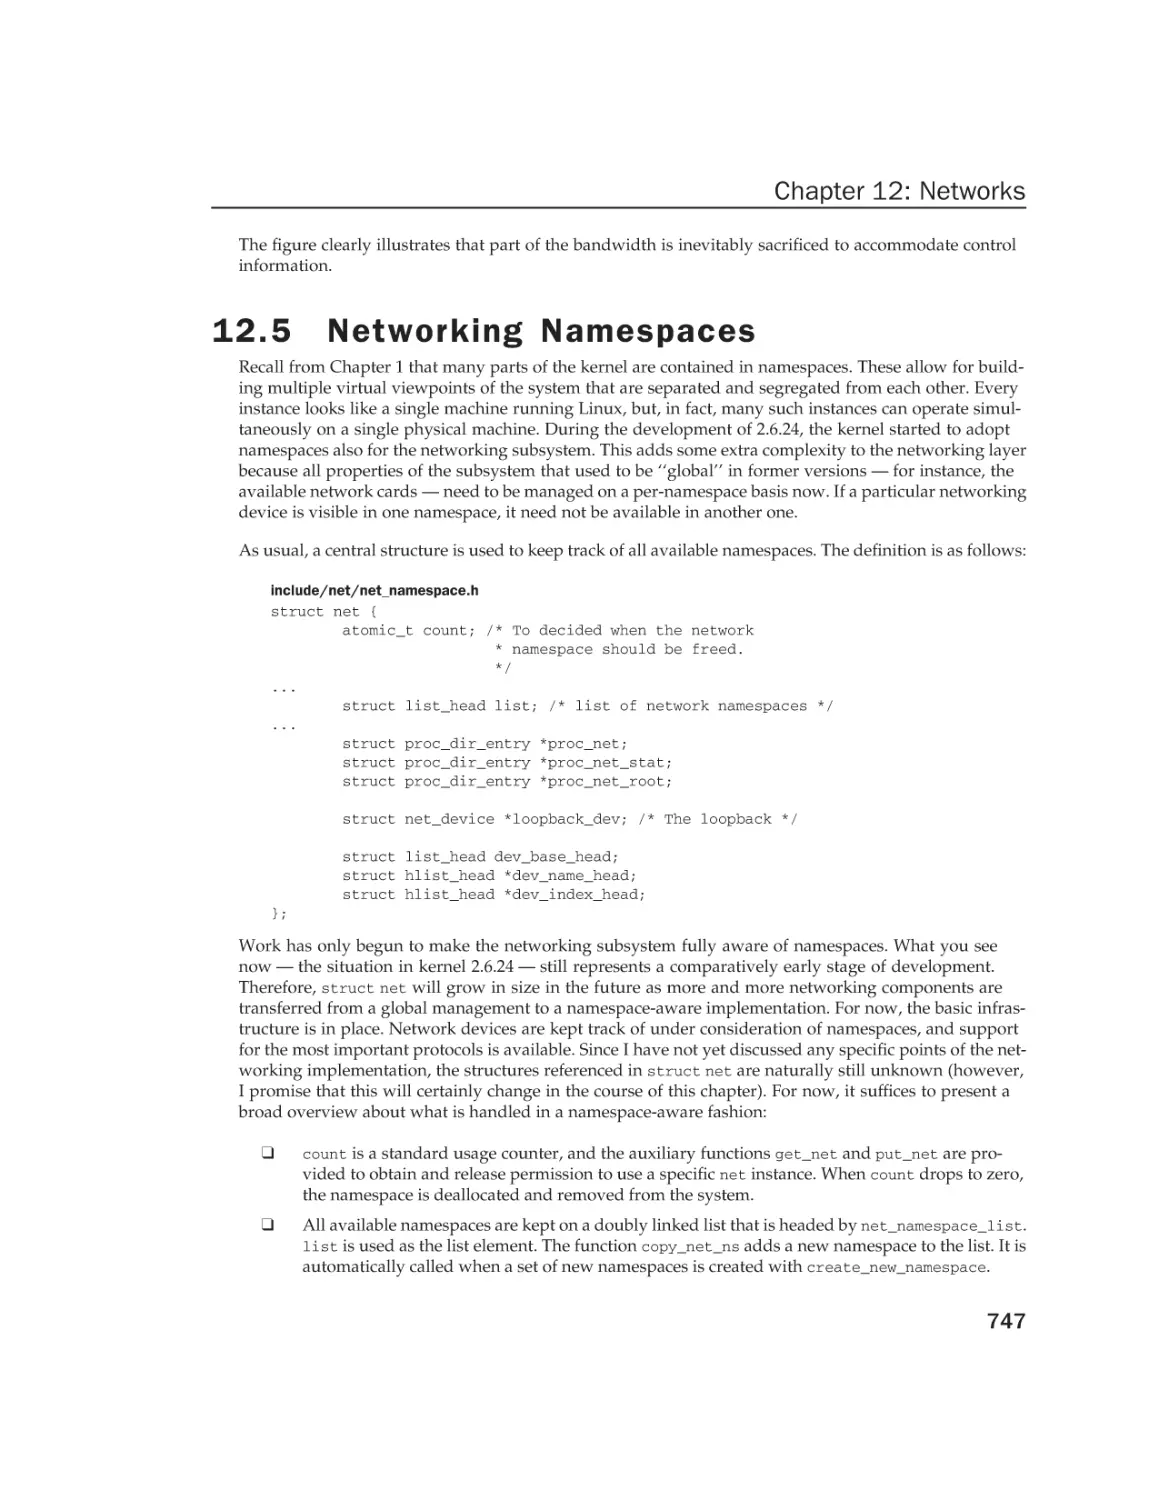 12.5 Networking Namespaces